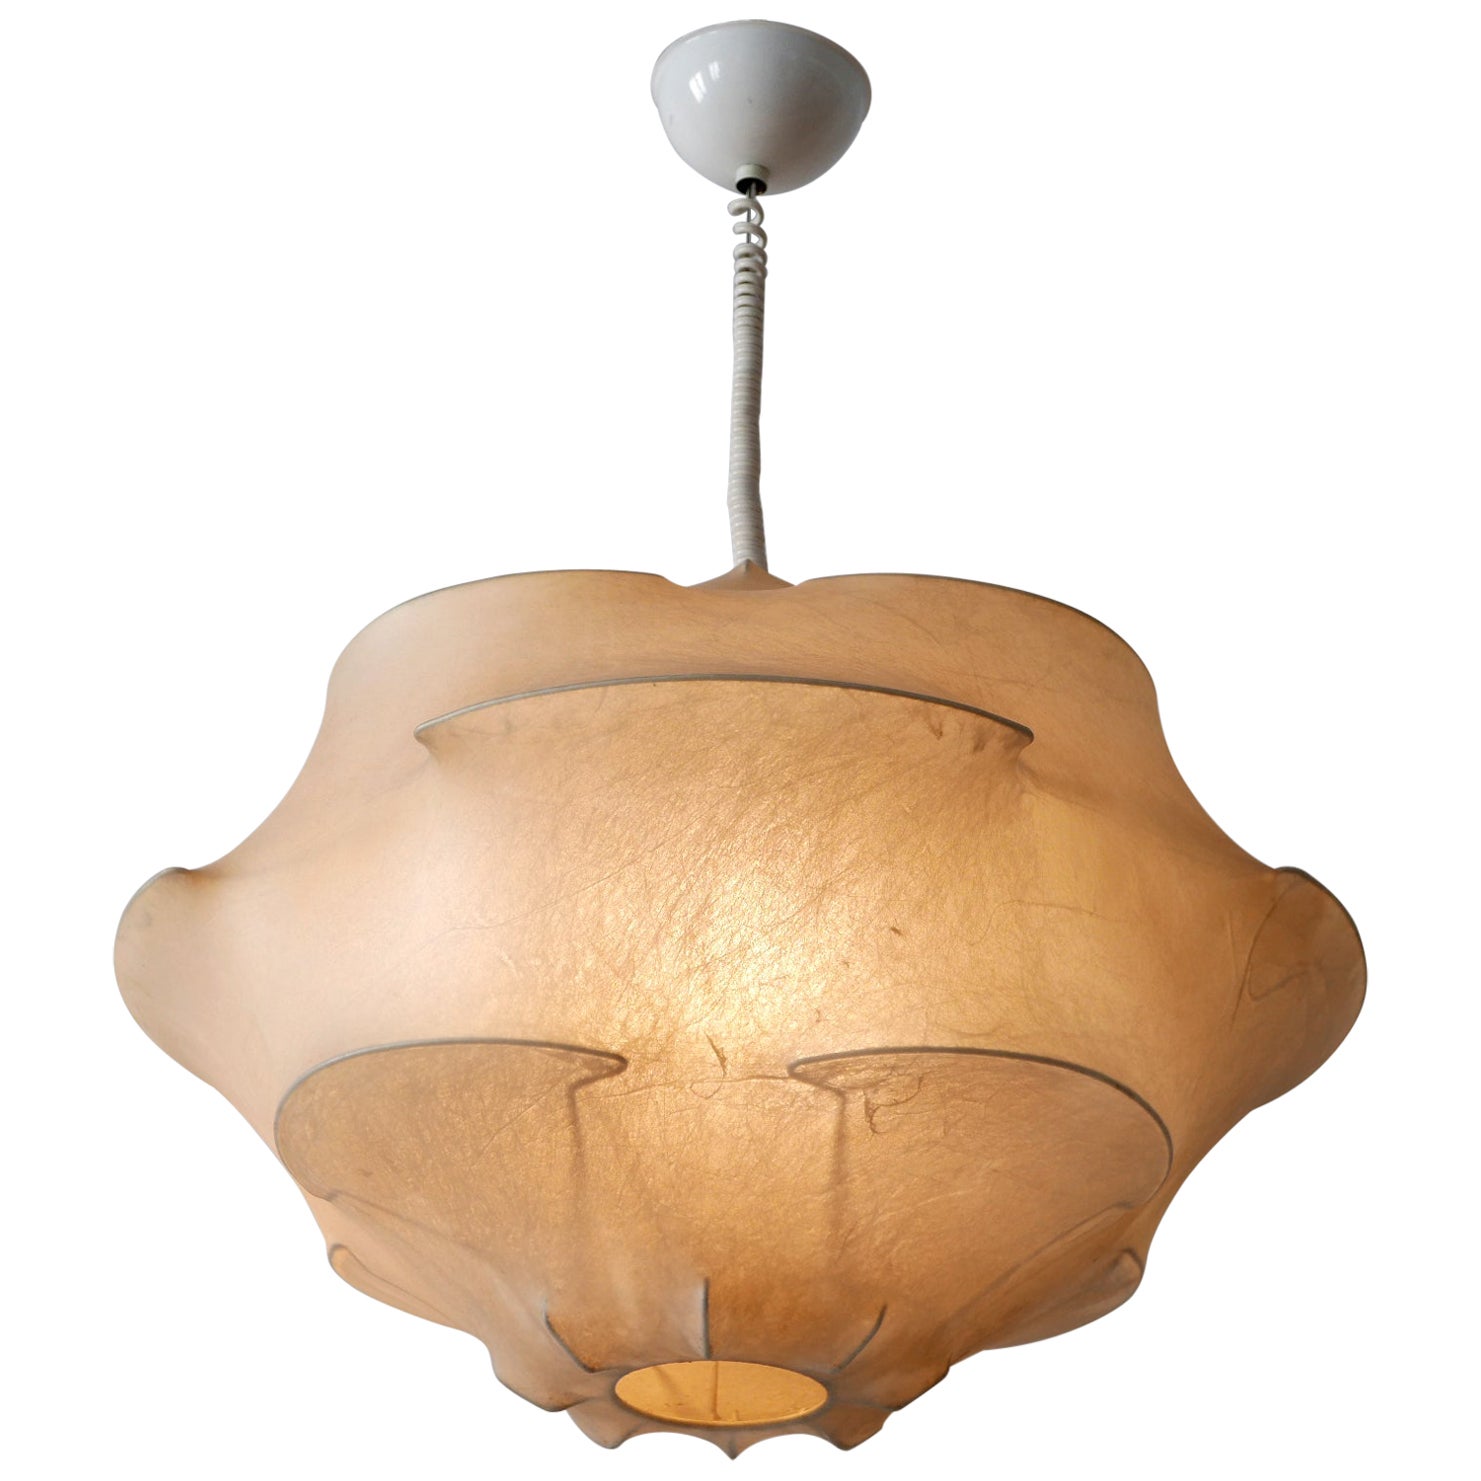 XL Mid-Century Modern Cocoon Pendant Lamp or Hanging Light by Flos Italy, 1960s For Sale